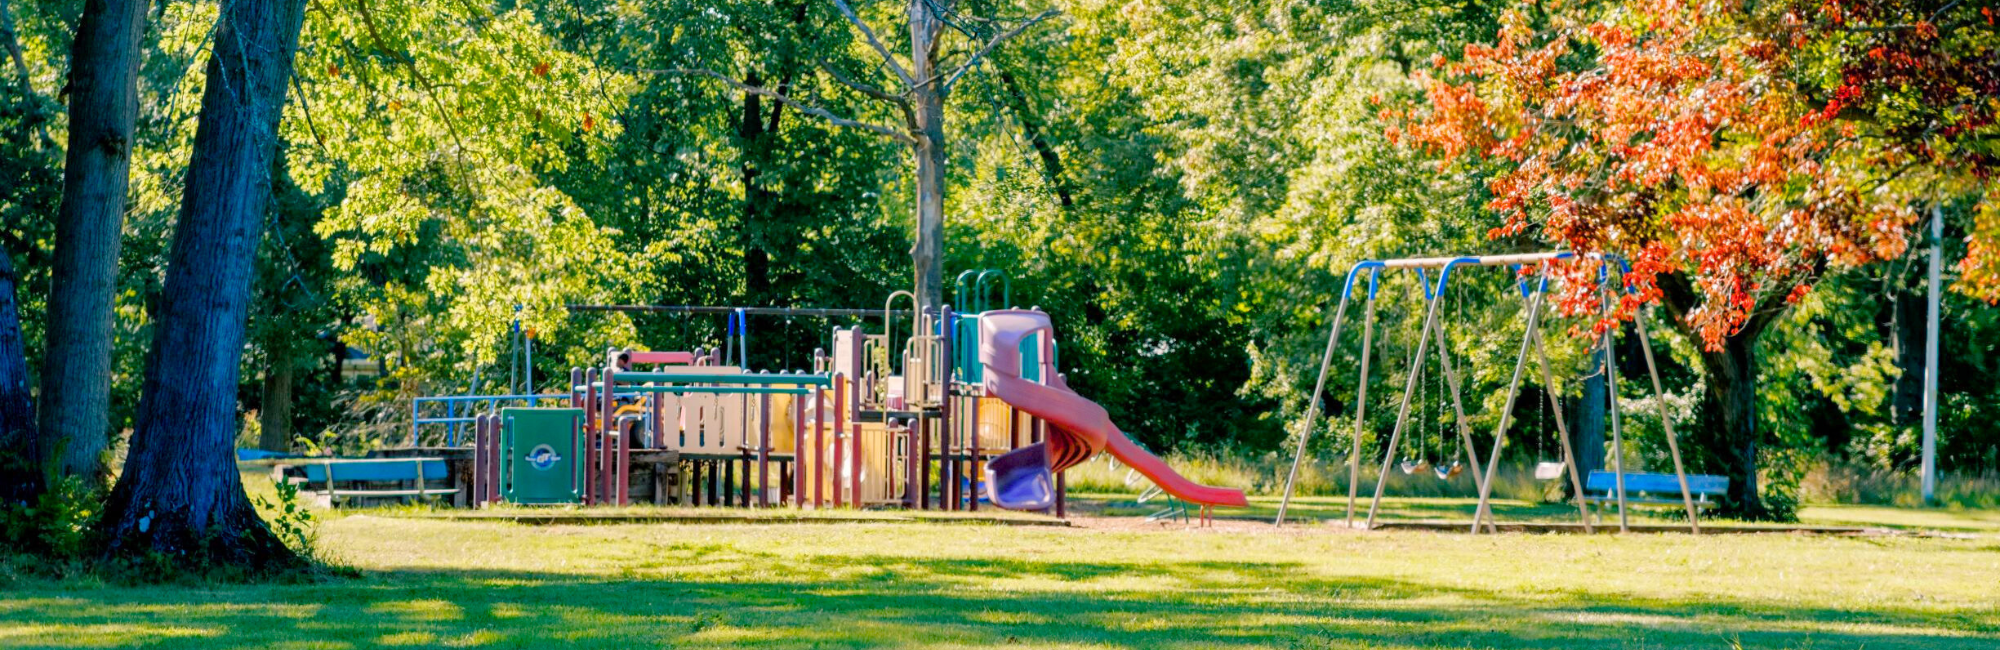 Park playground surrounded by colorful trees